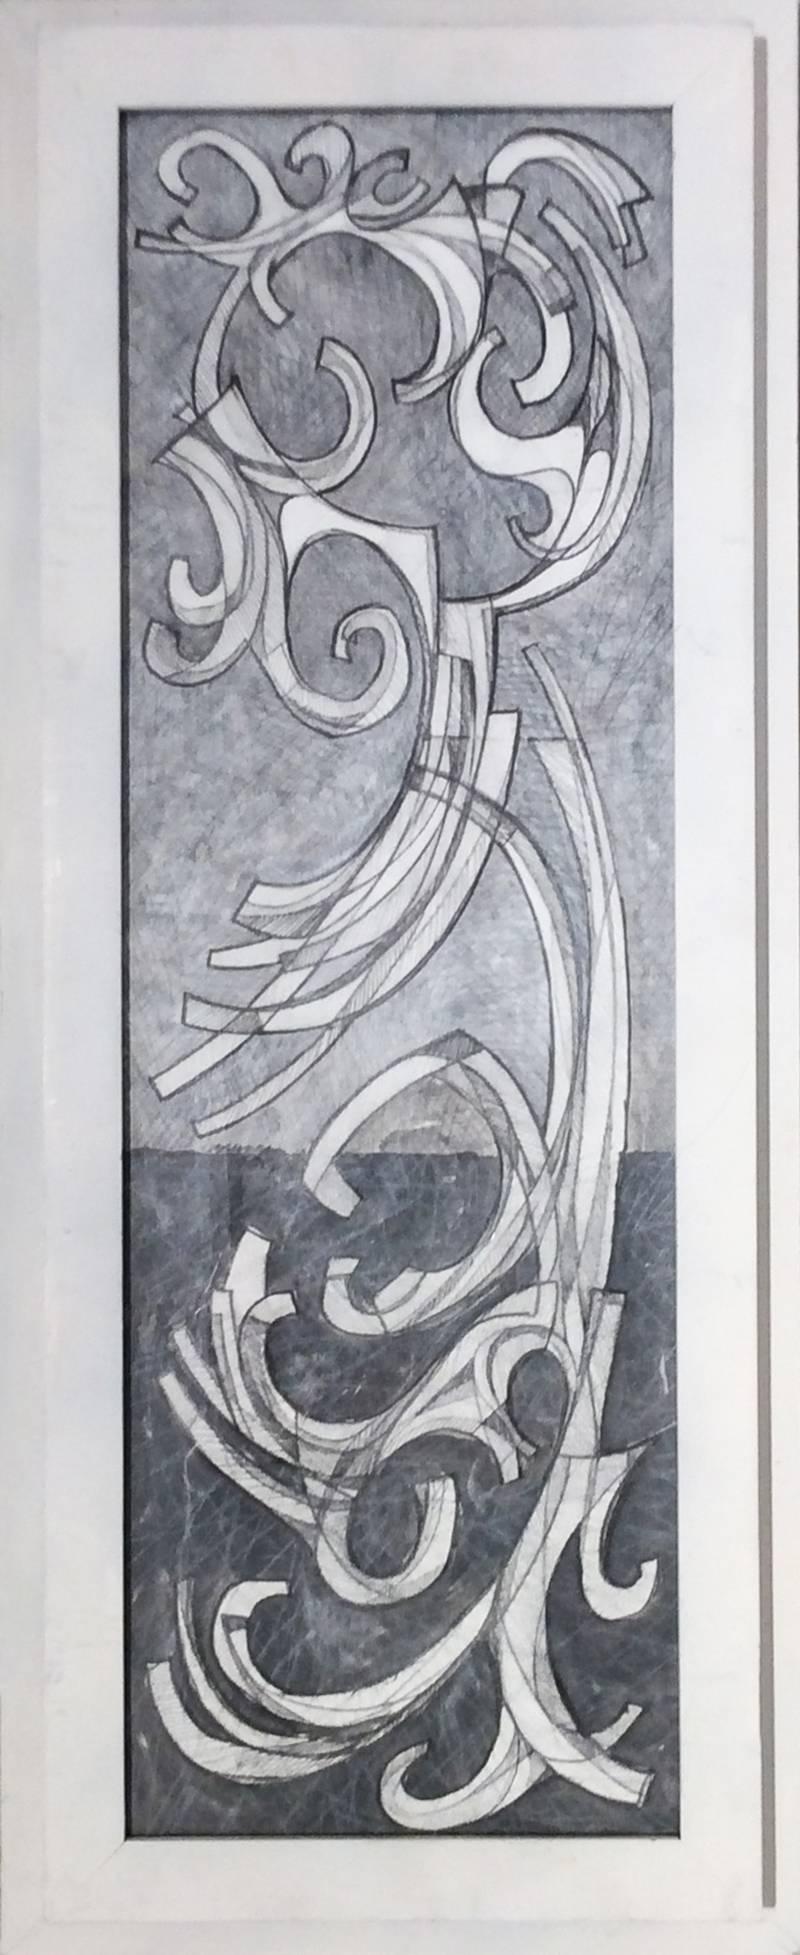 Arabesque 2 (Abstract Drawing on Paper in Vertical White Frame) - Art by David Dew Bruner